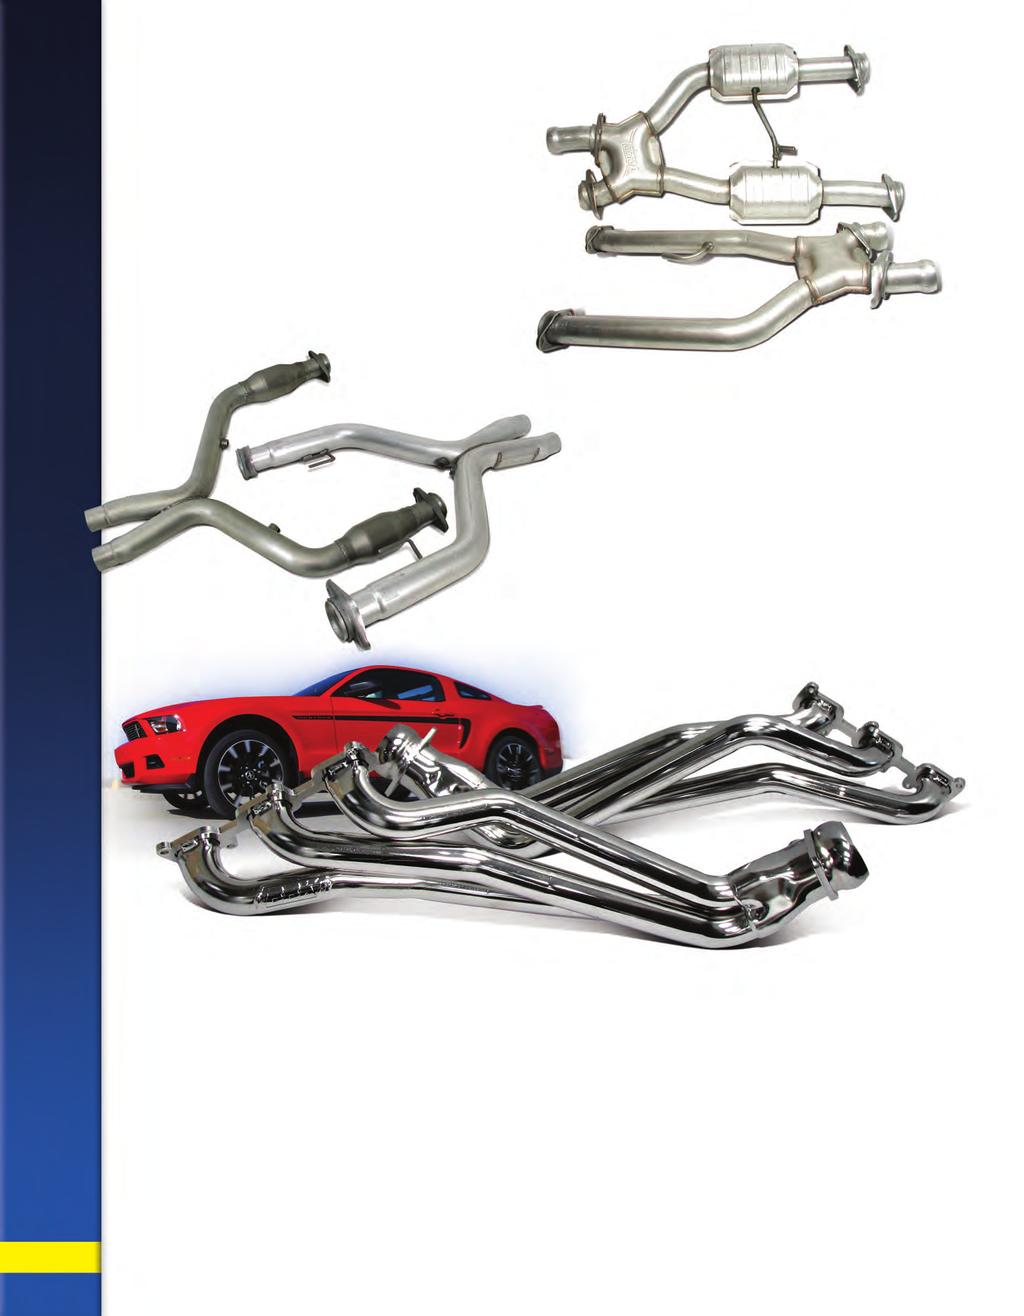 FORD PERFORMANCE EXHAUST 1996 04 MUSTANG GT/cOBRA HIGH-FLOw MID-PIPES These matching high flow mid pipes are available in both H & X style configurations in either a converter street version or a